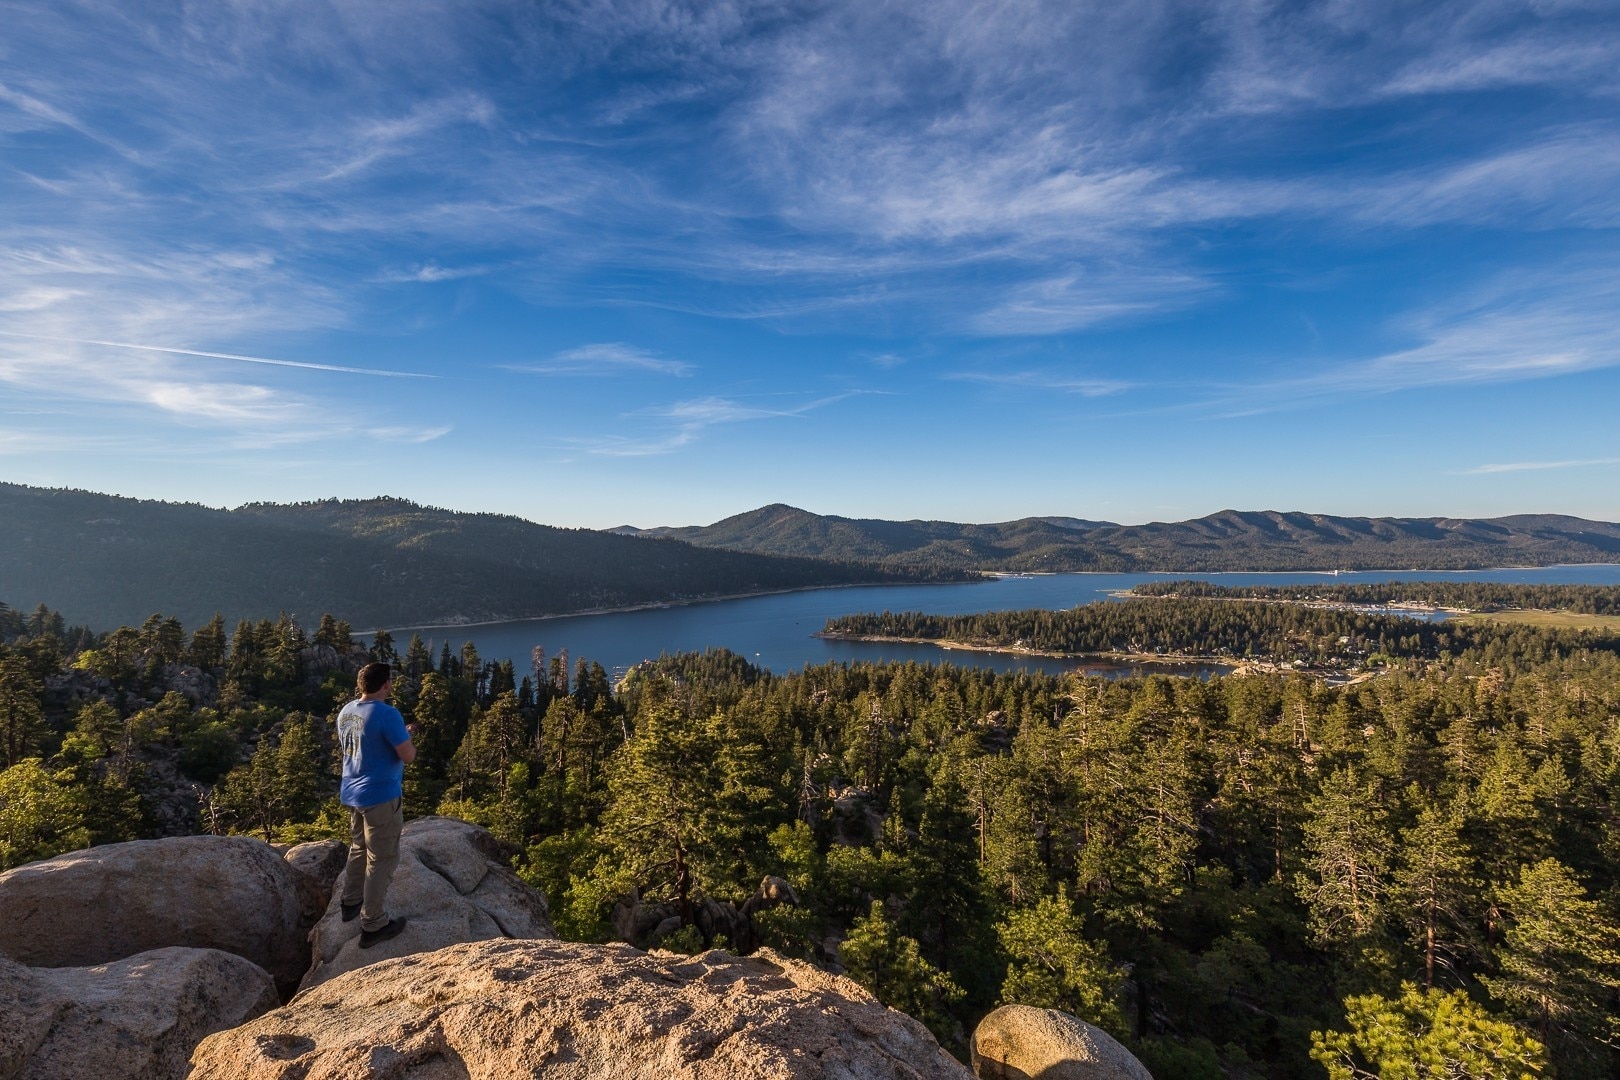 IMHO the most epic view for a modest hike in all of SoCal. 30 minutes of hard work and you get the most amazing panoramic view of Big Bear above all the surrounding tree tops. 

Tip - this is a really popular hike so to avoid the crowds go on a weekday or early morning before most people have gotten up. 

#AdventurePacked #TroverTips